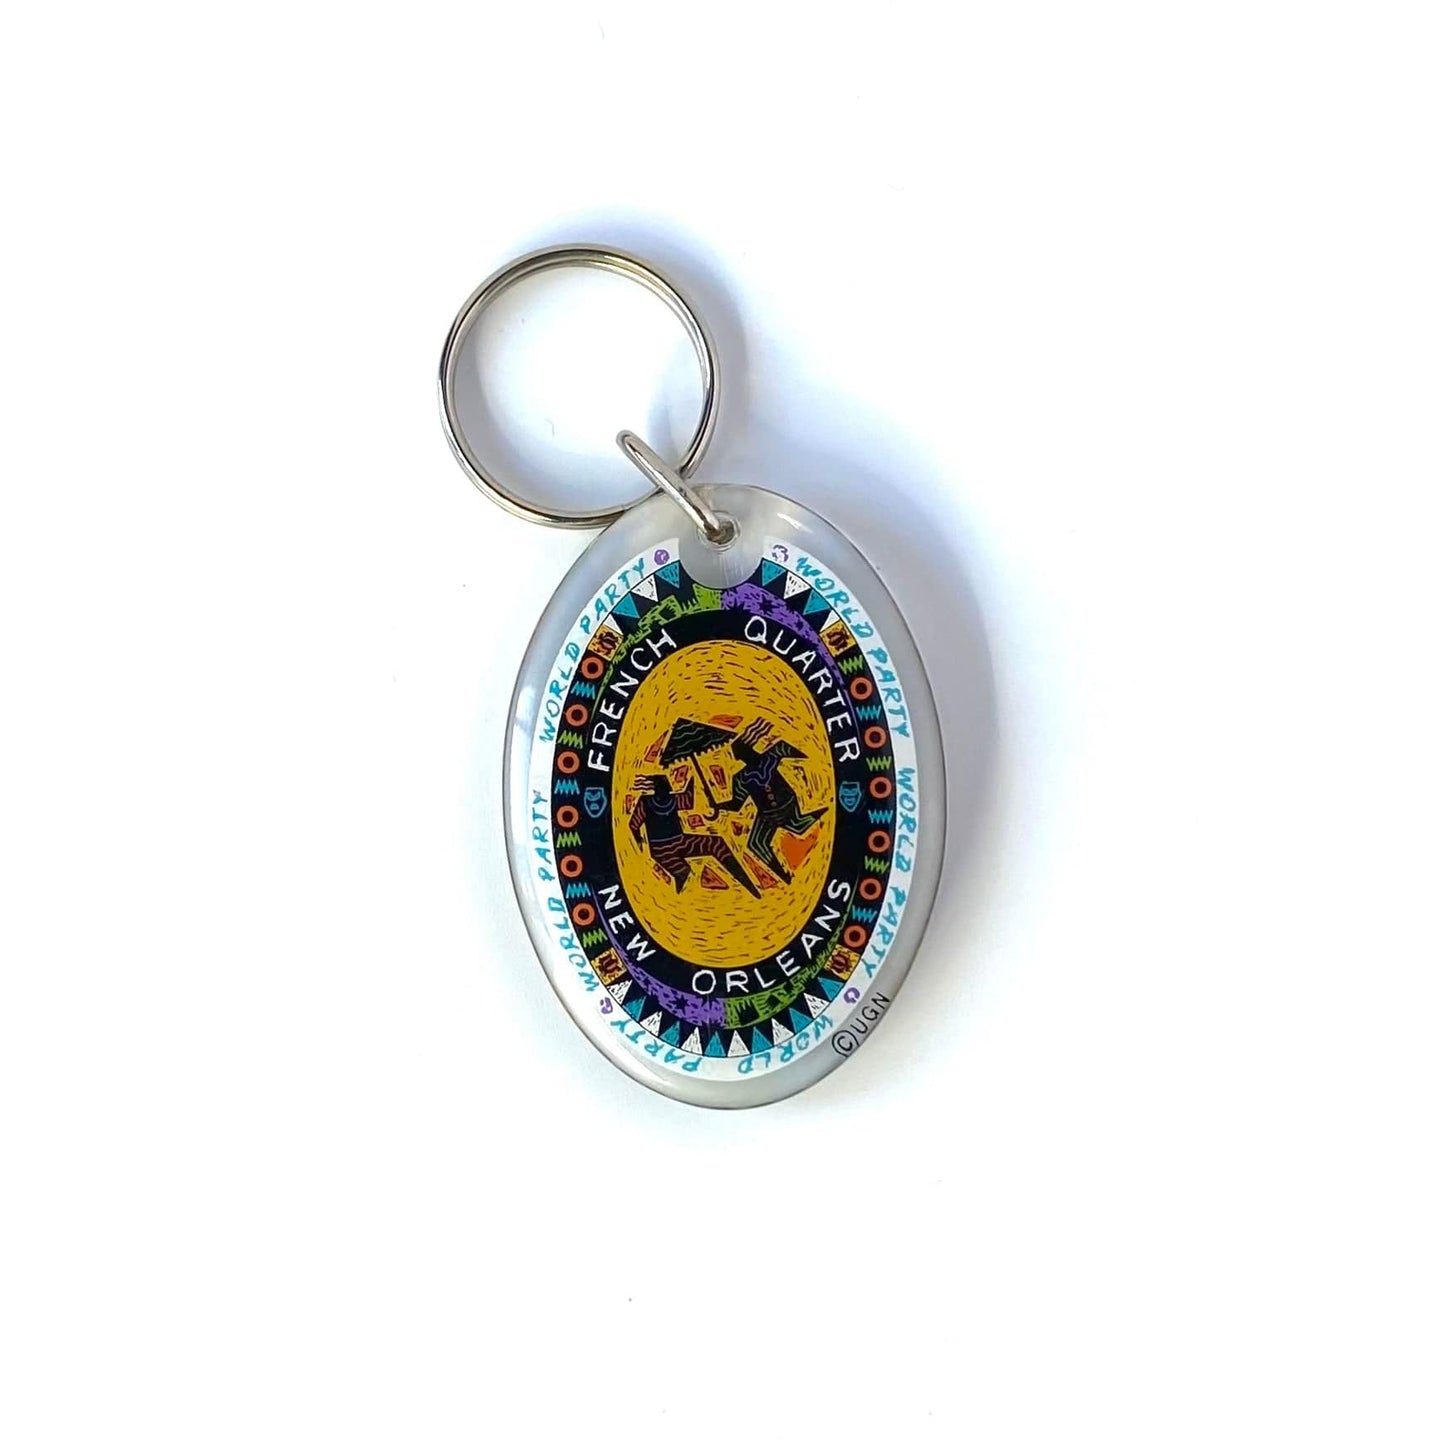 “French Quarter New Orleans World Party” Travel Souvenir Keychain Key Ring Oval Clear Acrylic